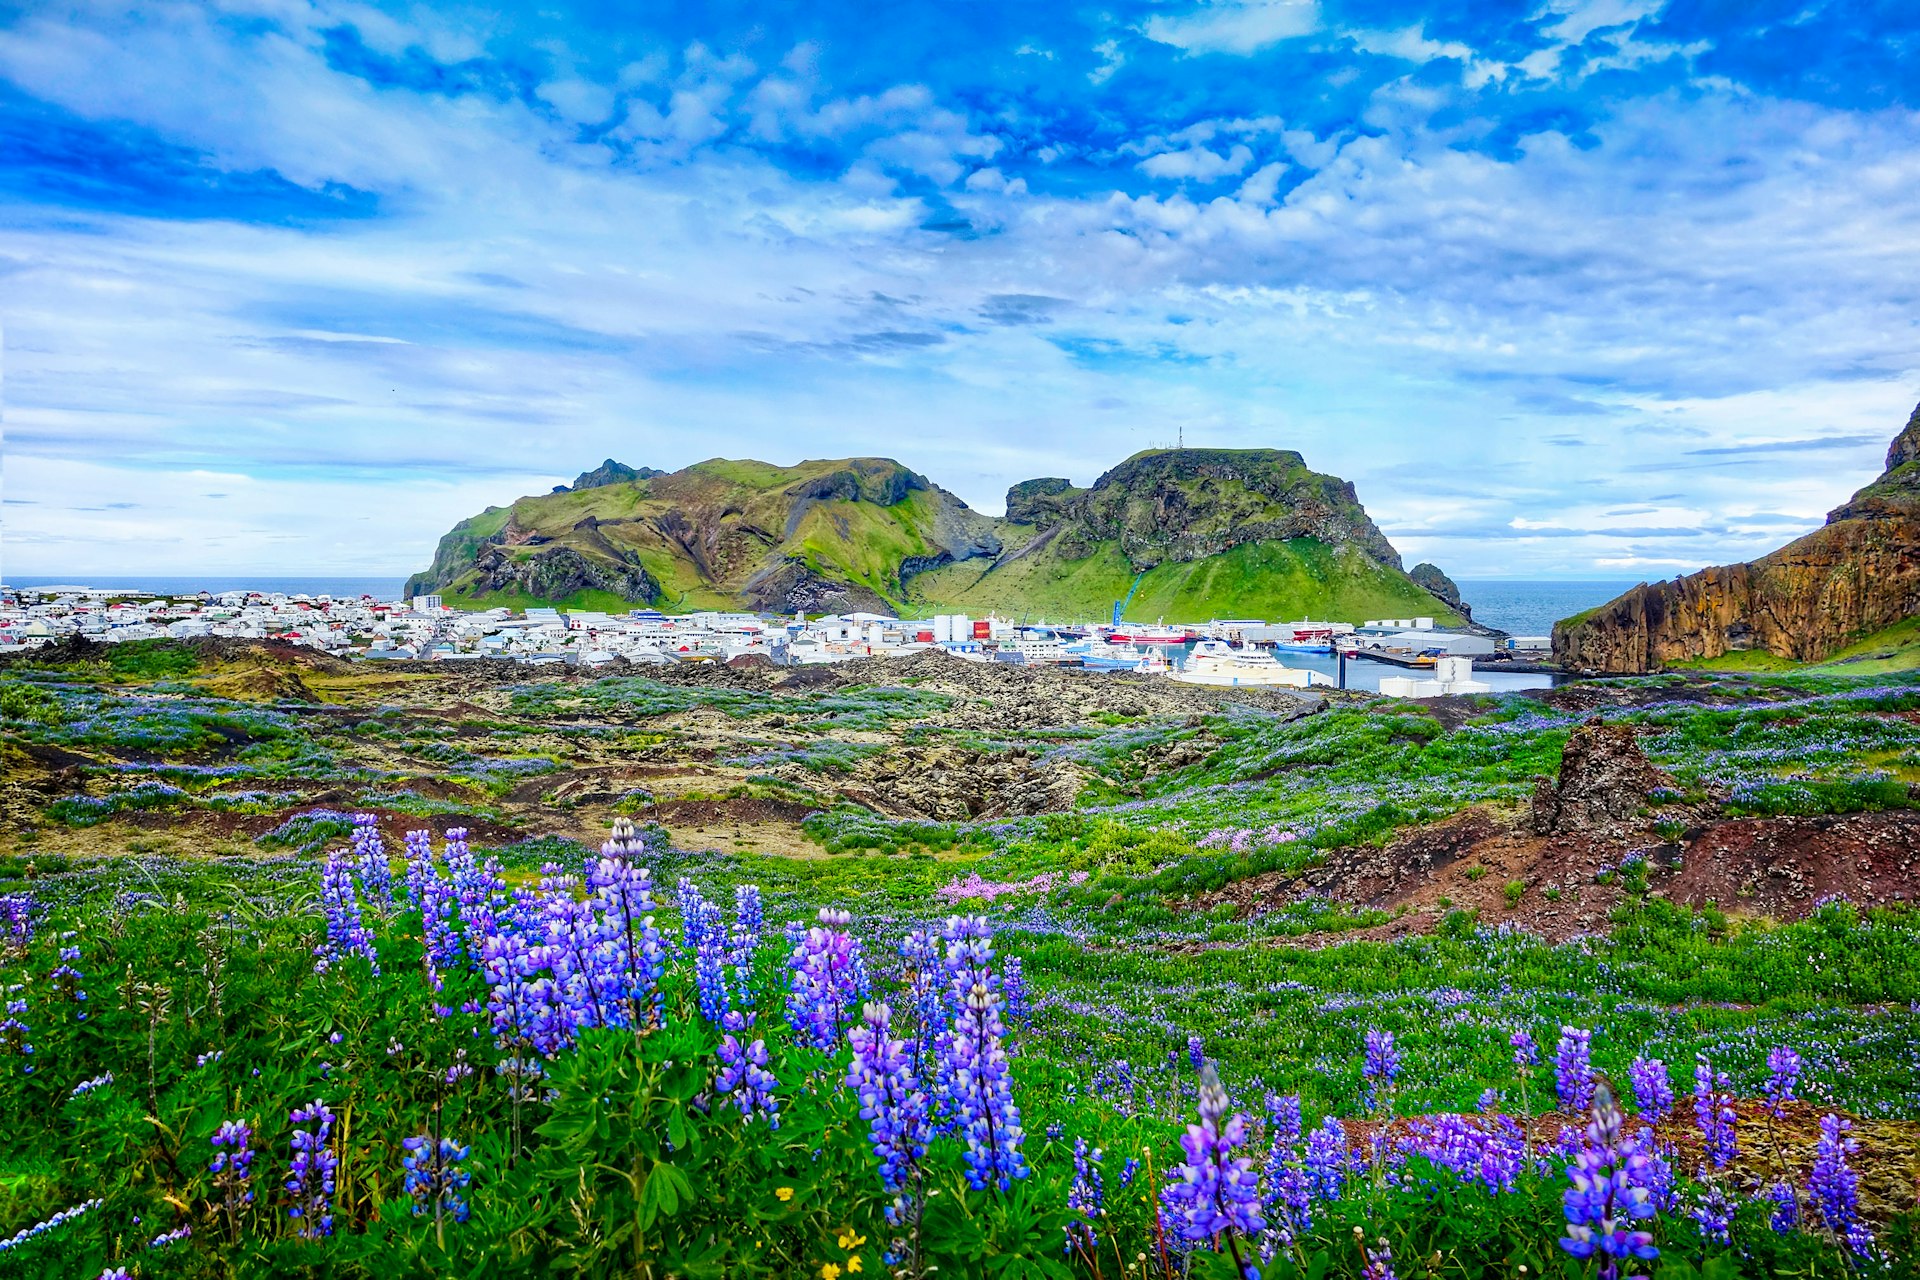 Purple flowers and greenery growing on a rocky landscape. In the distance is a series of colorful low-rise buildings near the sea